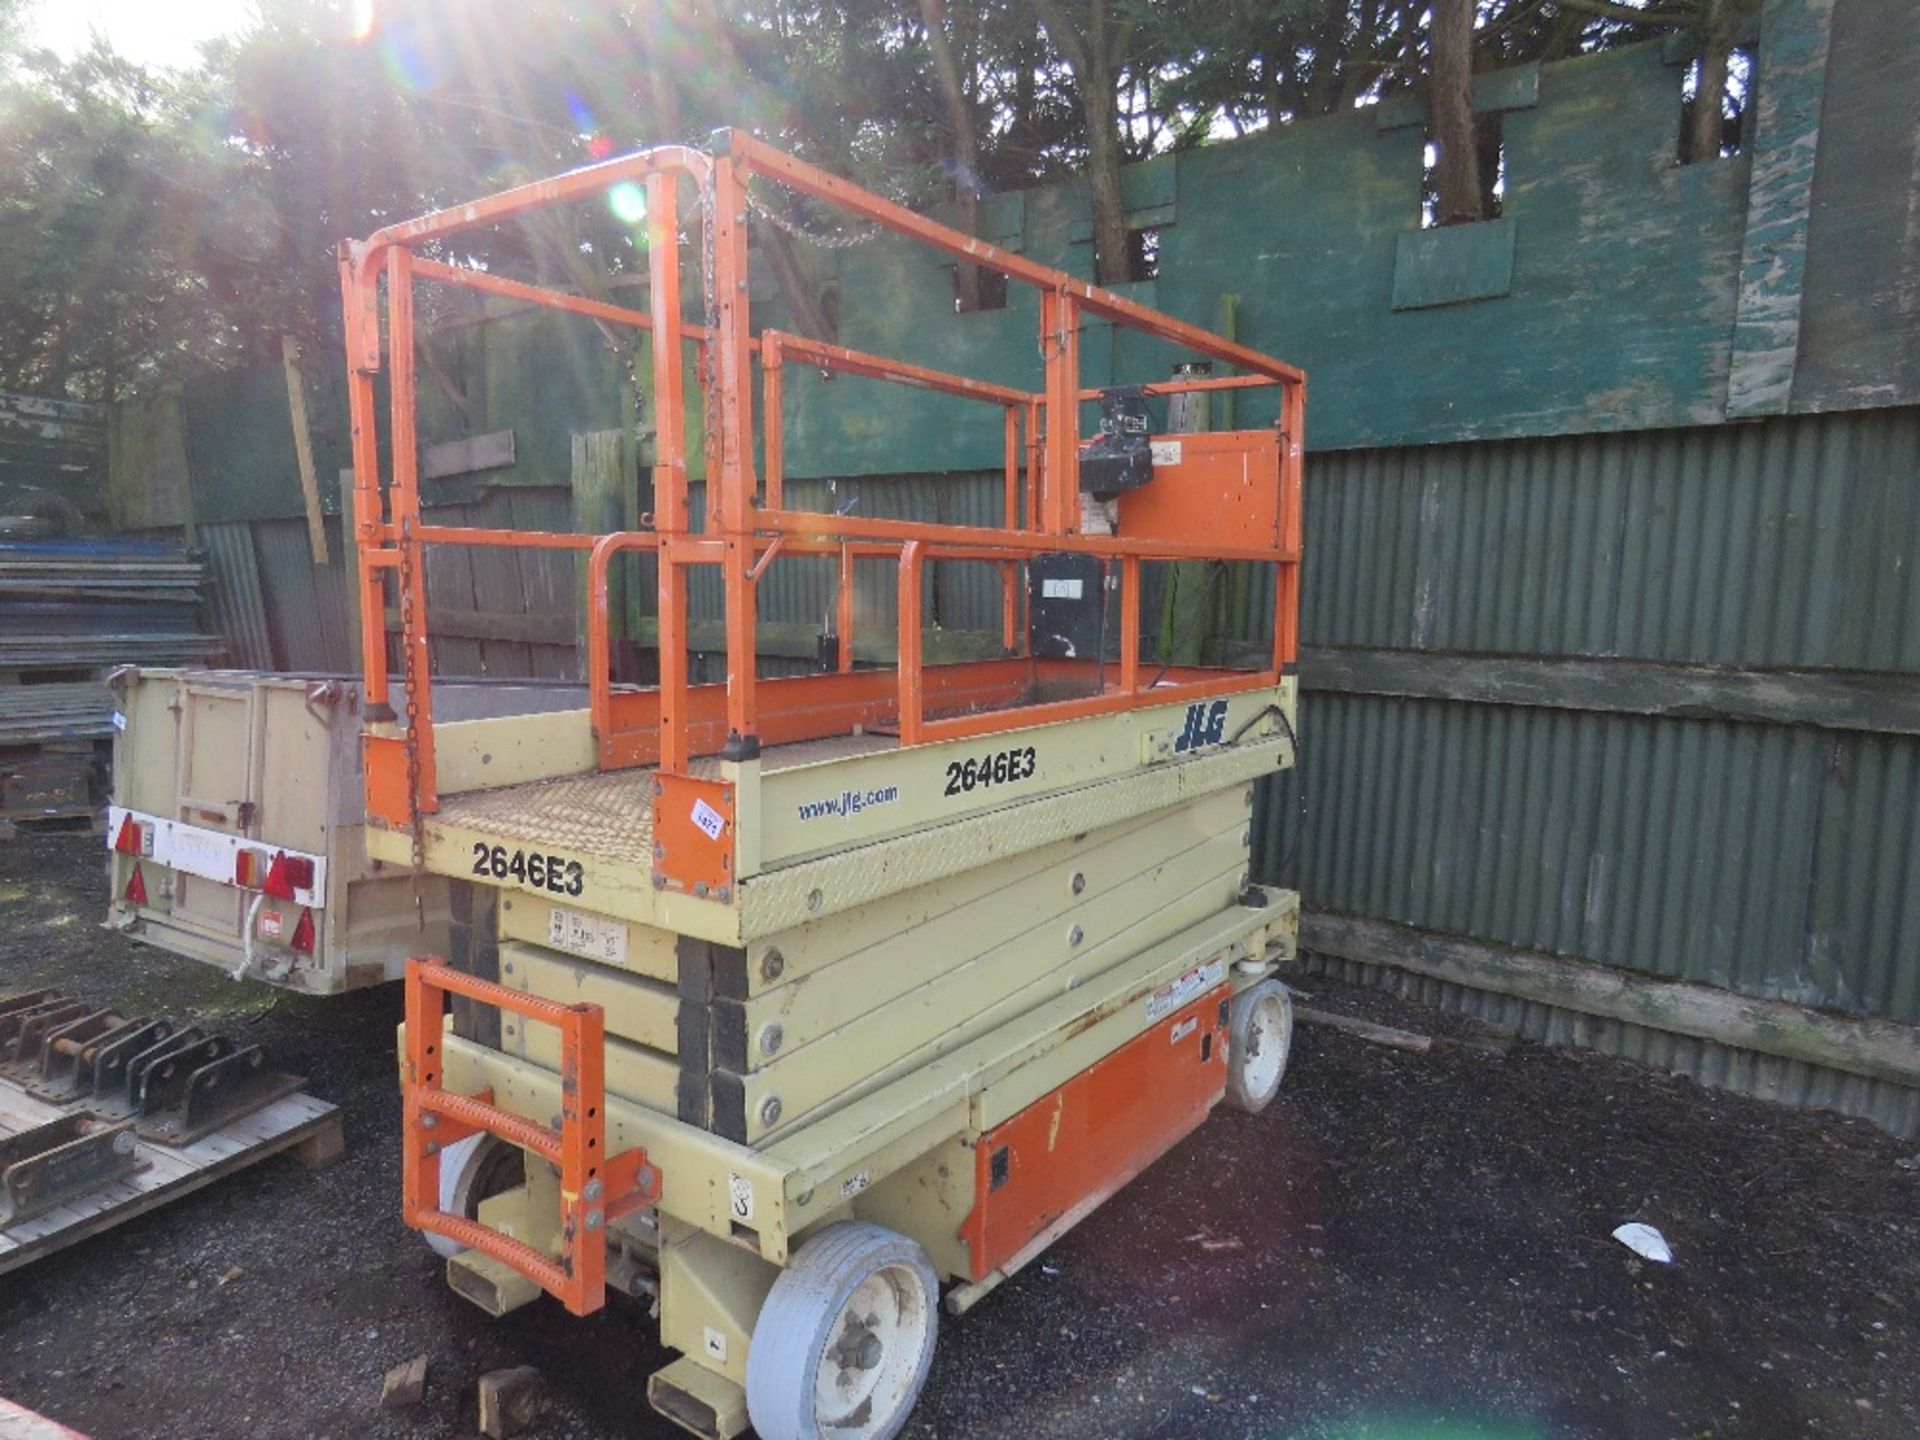 JLG 2646E3 SCISSOR LIFT ACCESS PLATFORM SN:0200093924. BATTERY FLAT WHEN DELIVERED, THEREFORE SOLD A